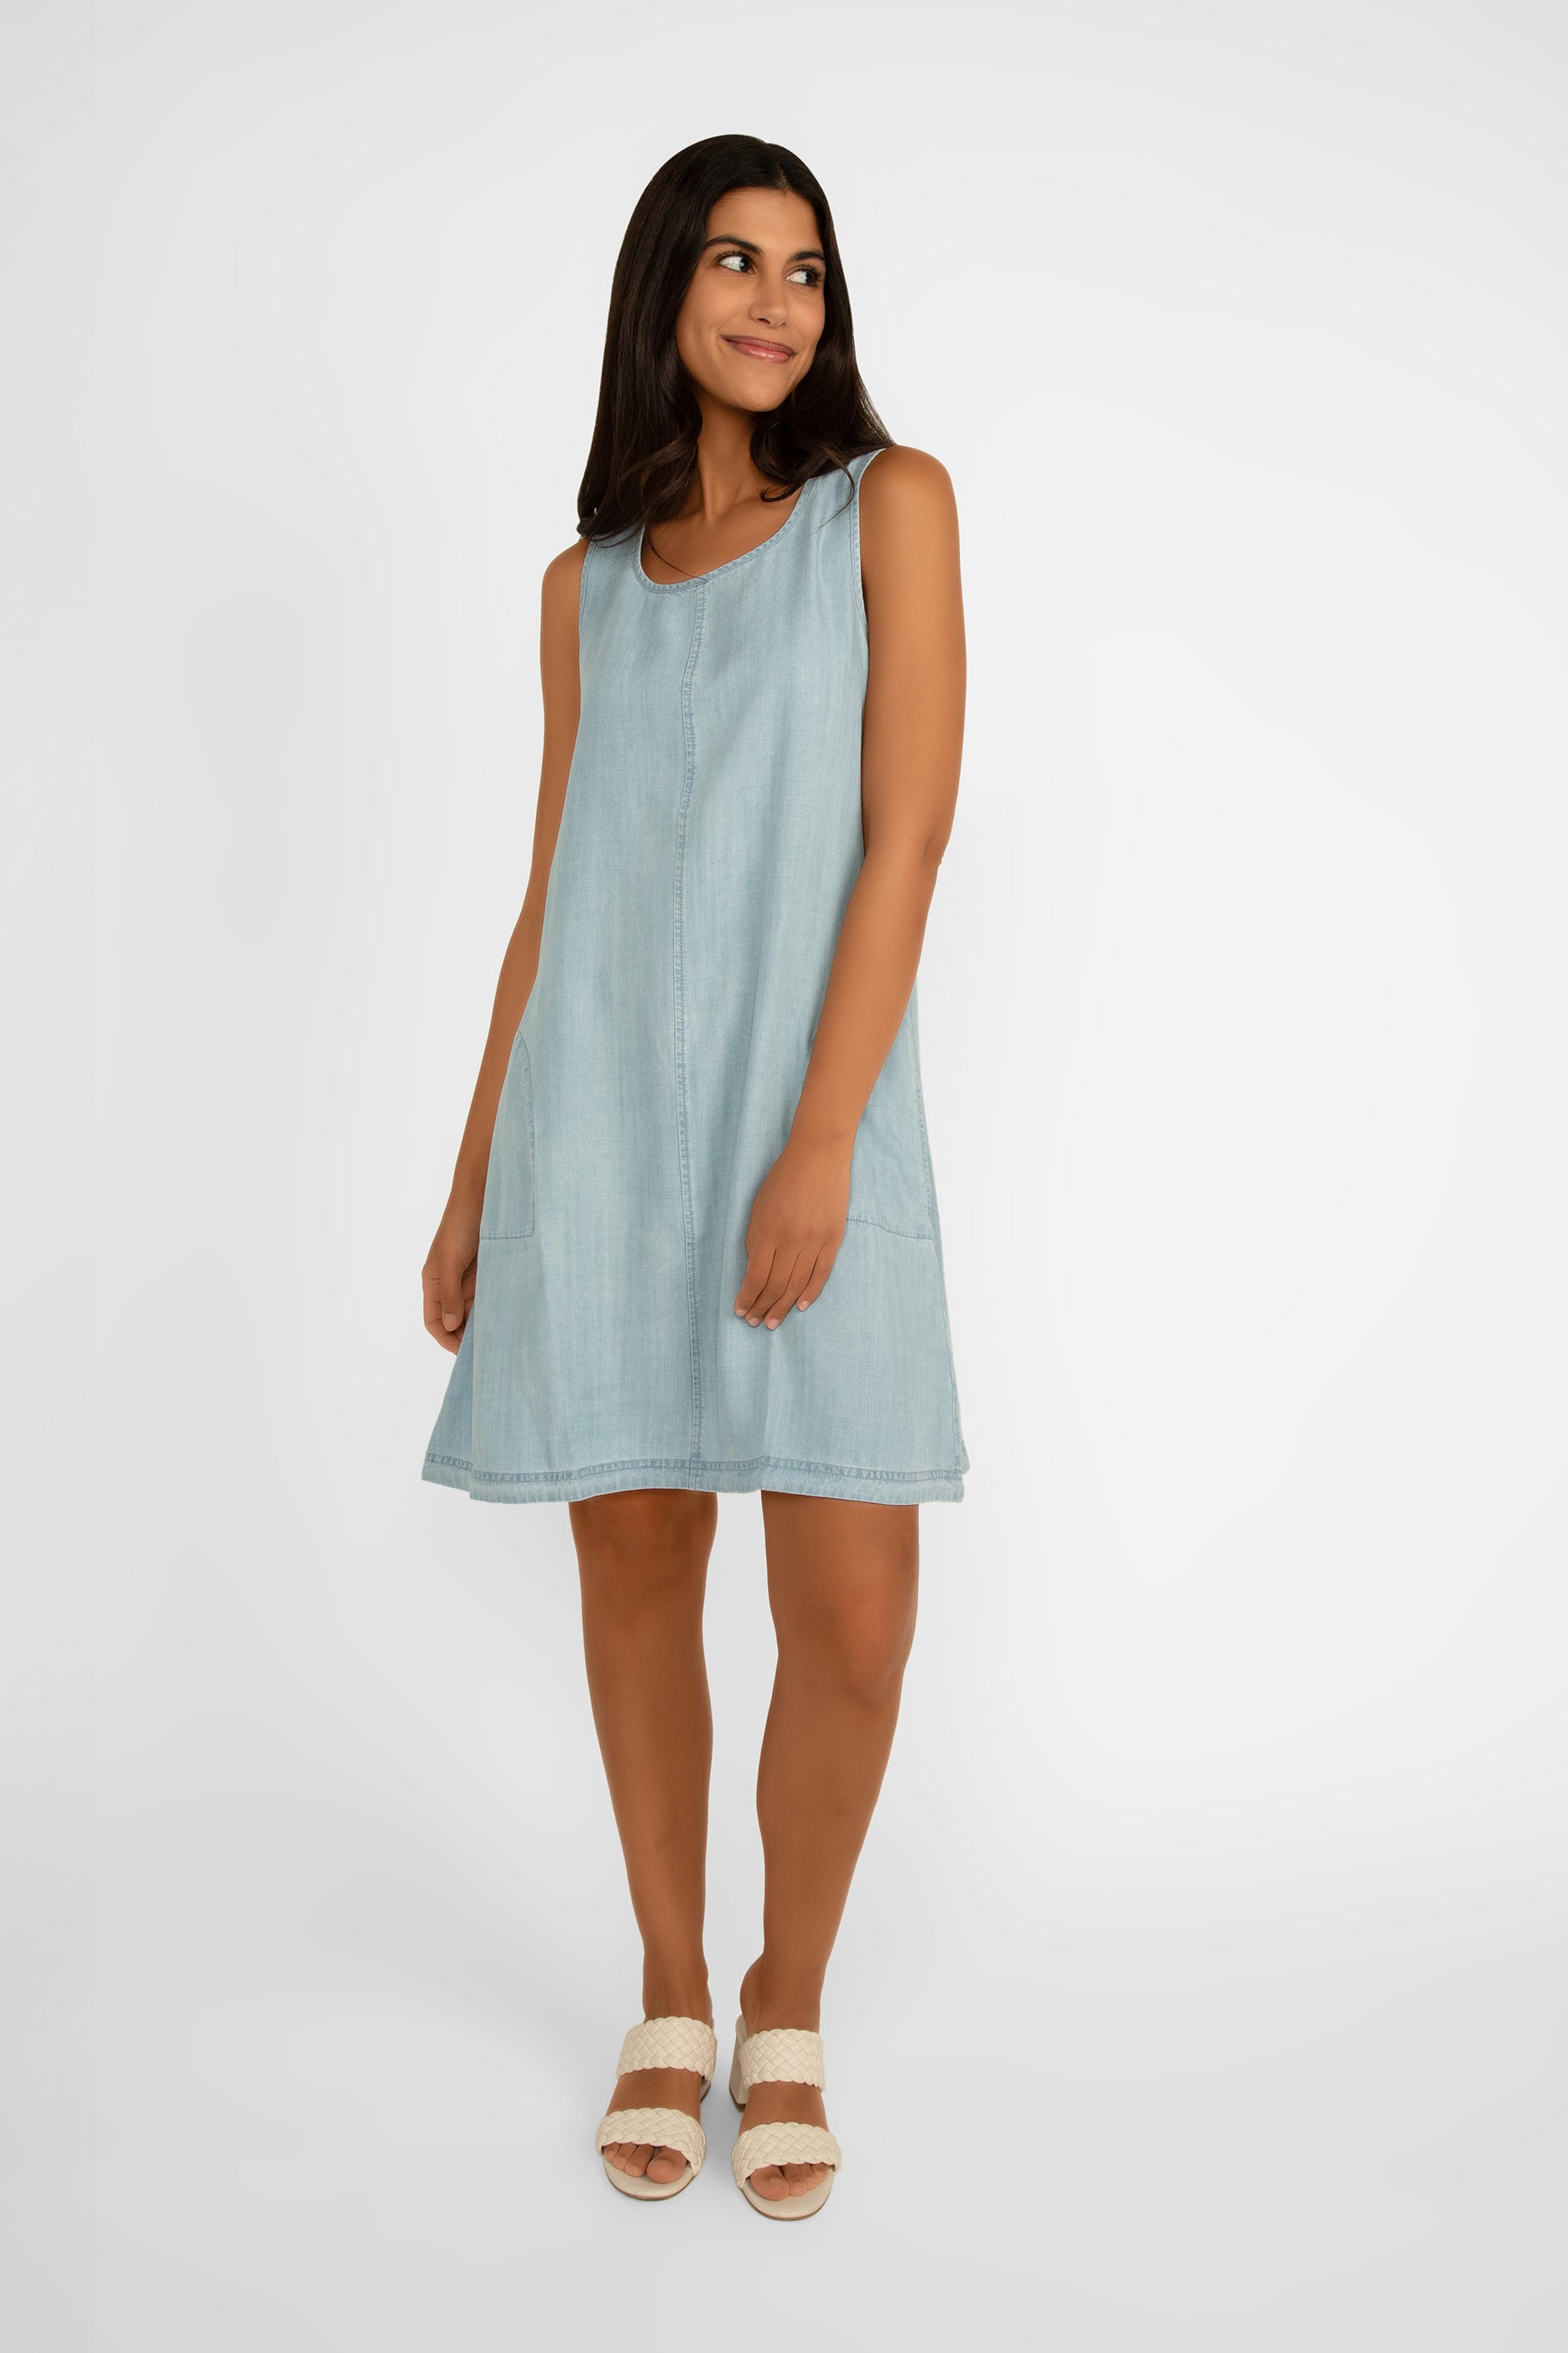 Renuar Clothing (R4285-E2143) Women's Sleevless A-Line Dress with Pockets in Chambray Blue